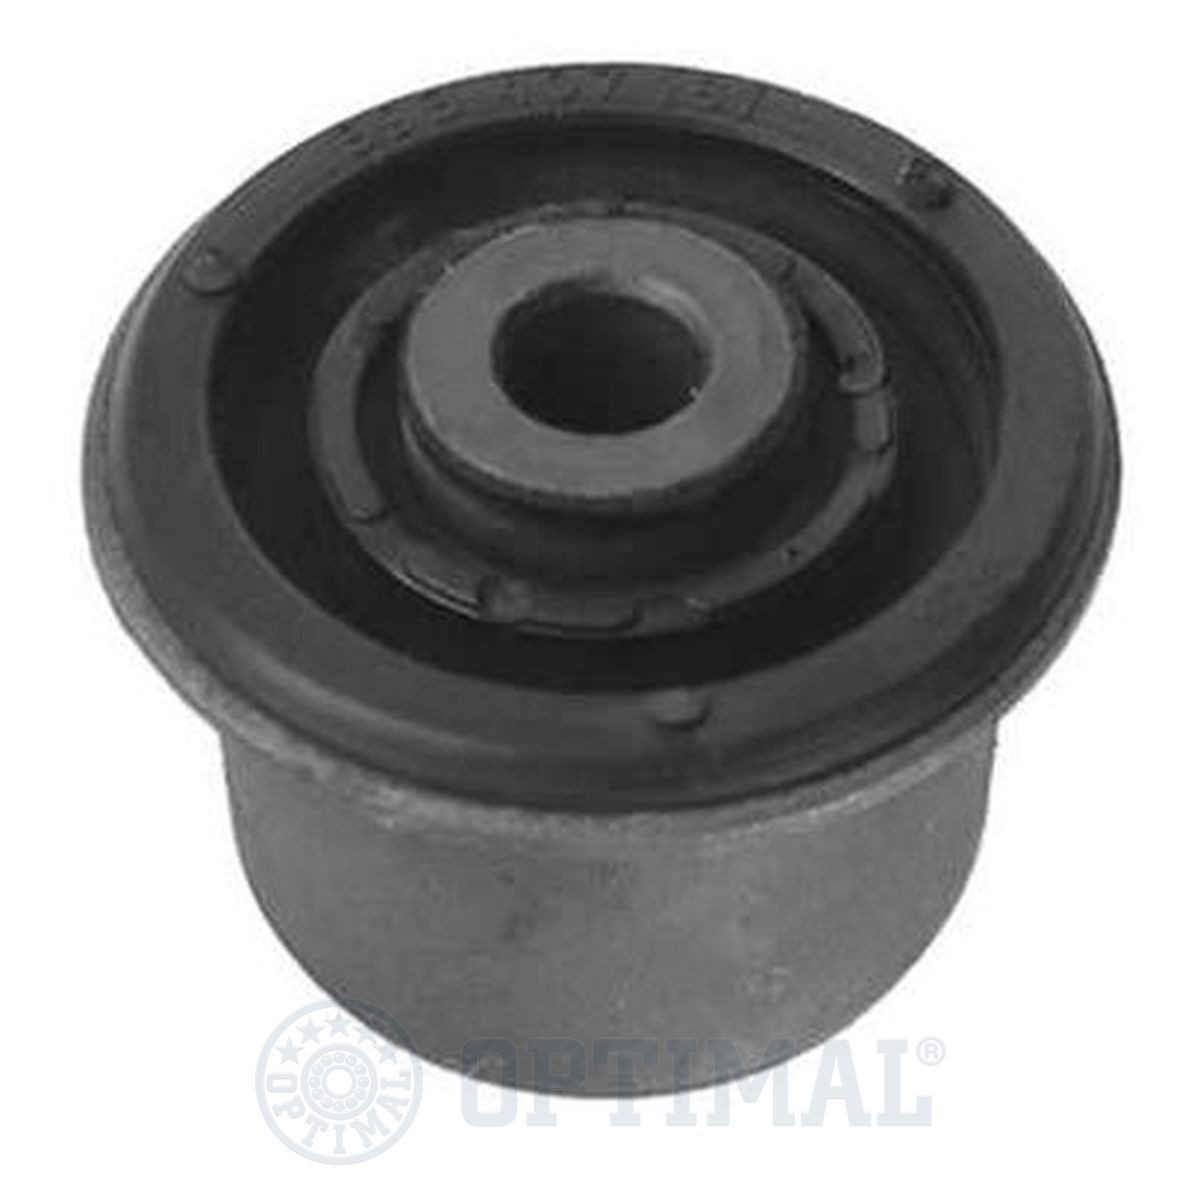 OPTIMAL Rear, Front, Front Axle, both sides, Rubber-Metal Mount Arm Bush F8-3057 buy